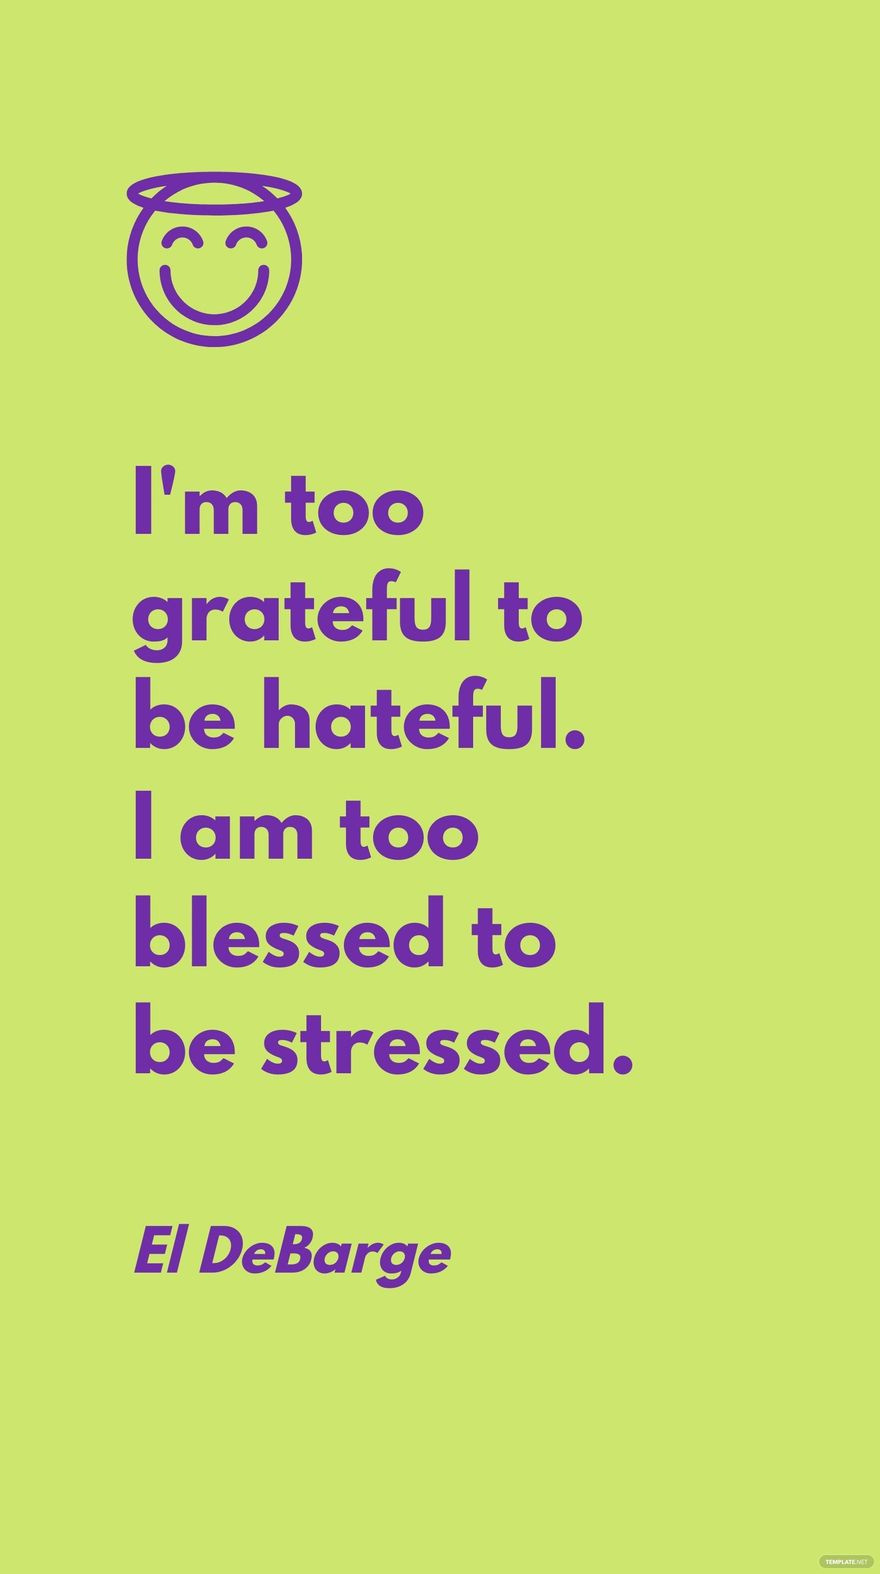 El DeBarge - I'm too grateful to be hateful. I am too blessed to be stressed.